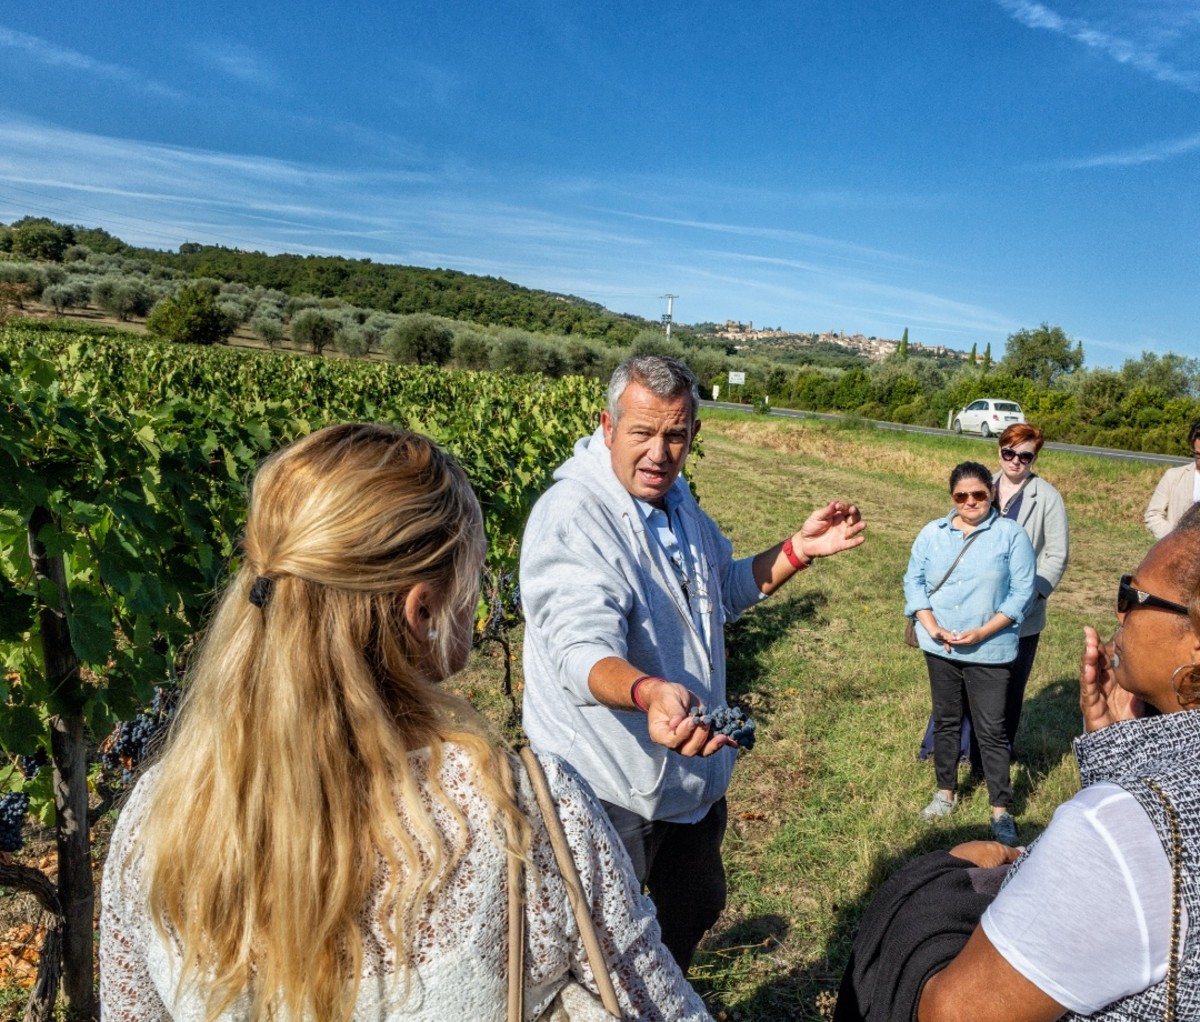 Vintner Giacomo Neri tasting grapes with a group of tourists across from Casanova di Neri winery in Montalcino, Tuscany